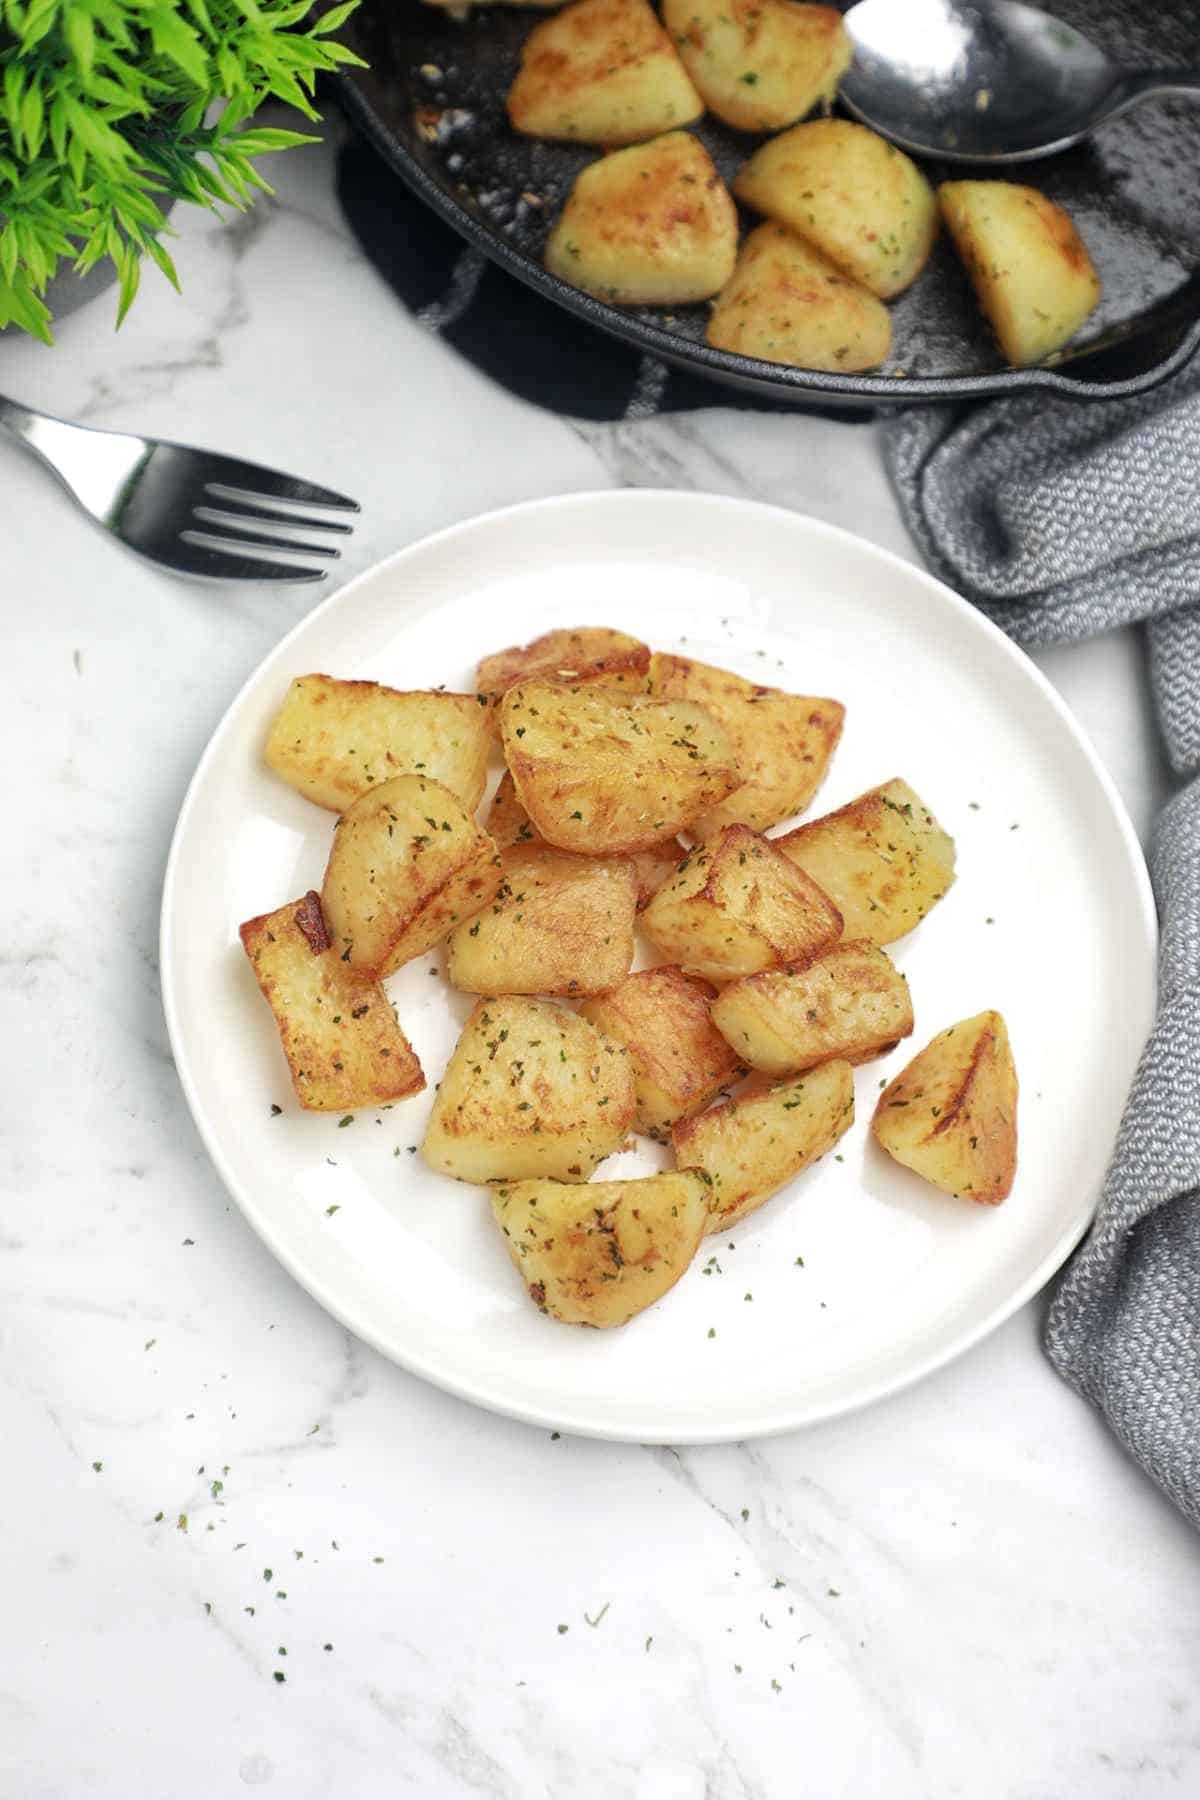 some potatoes on the plate and some in the pan.